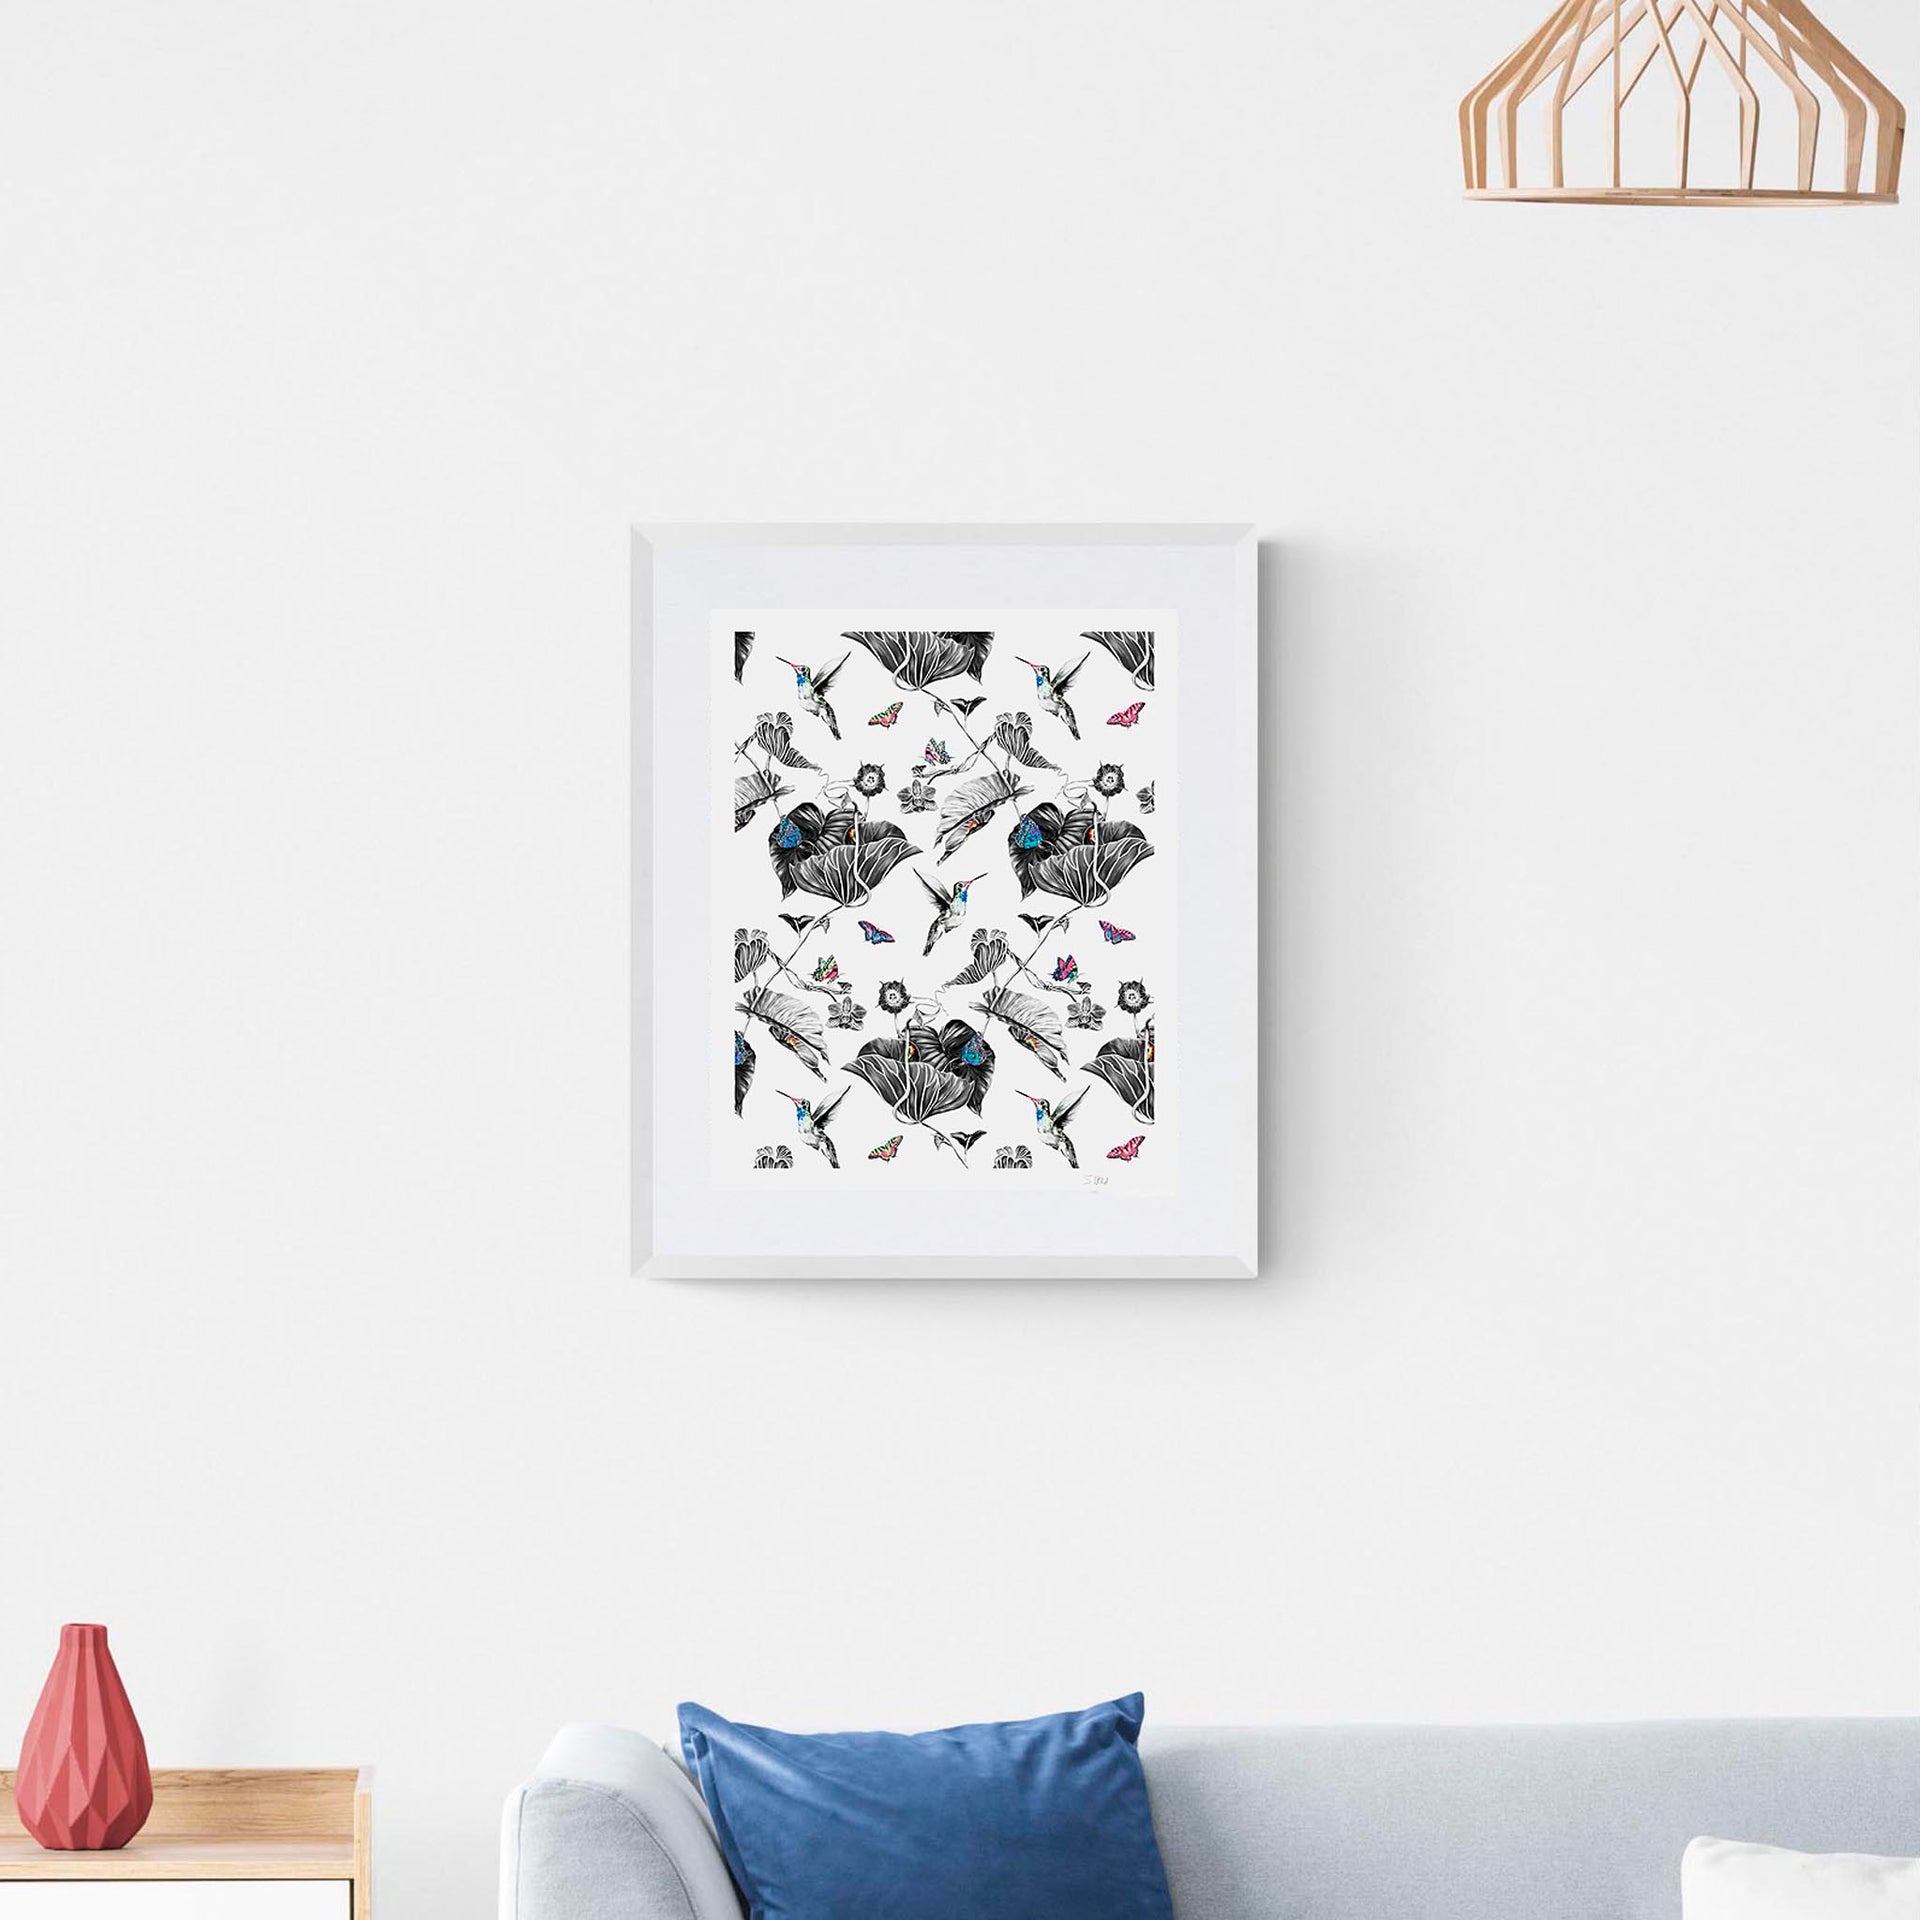 Hummingbird limited edition print in white frame on white wall